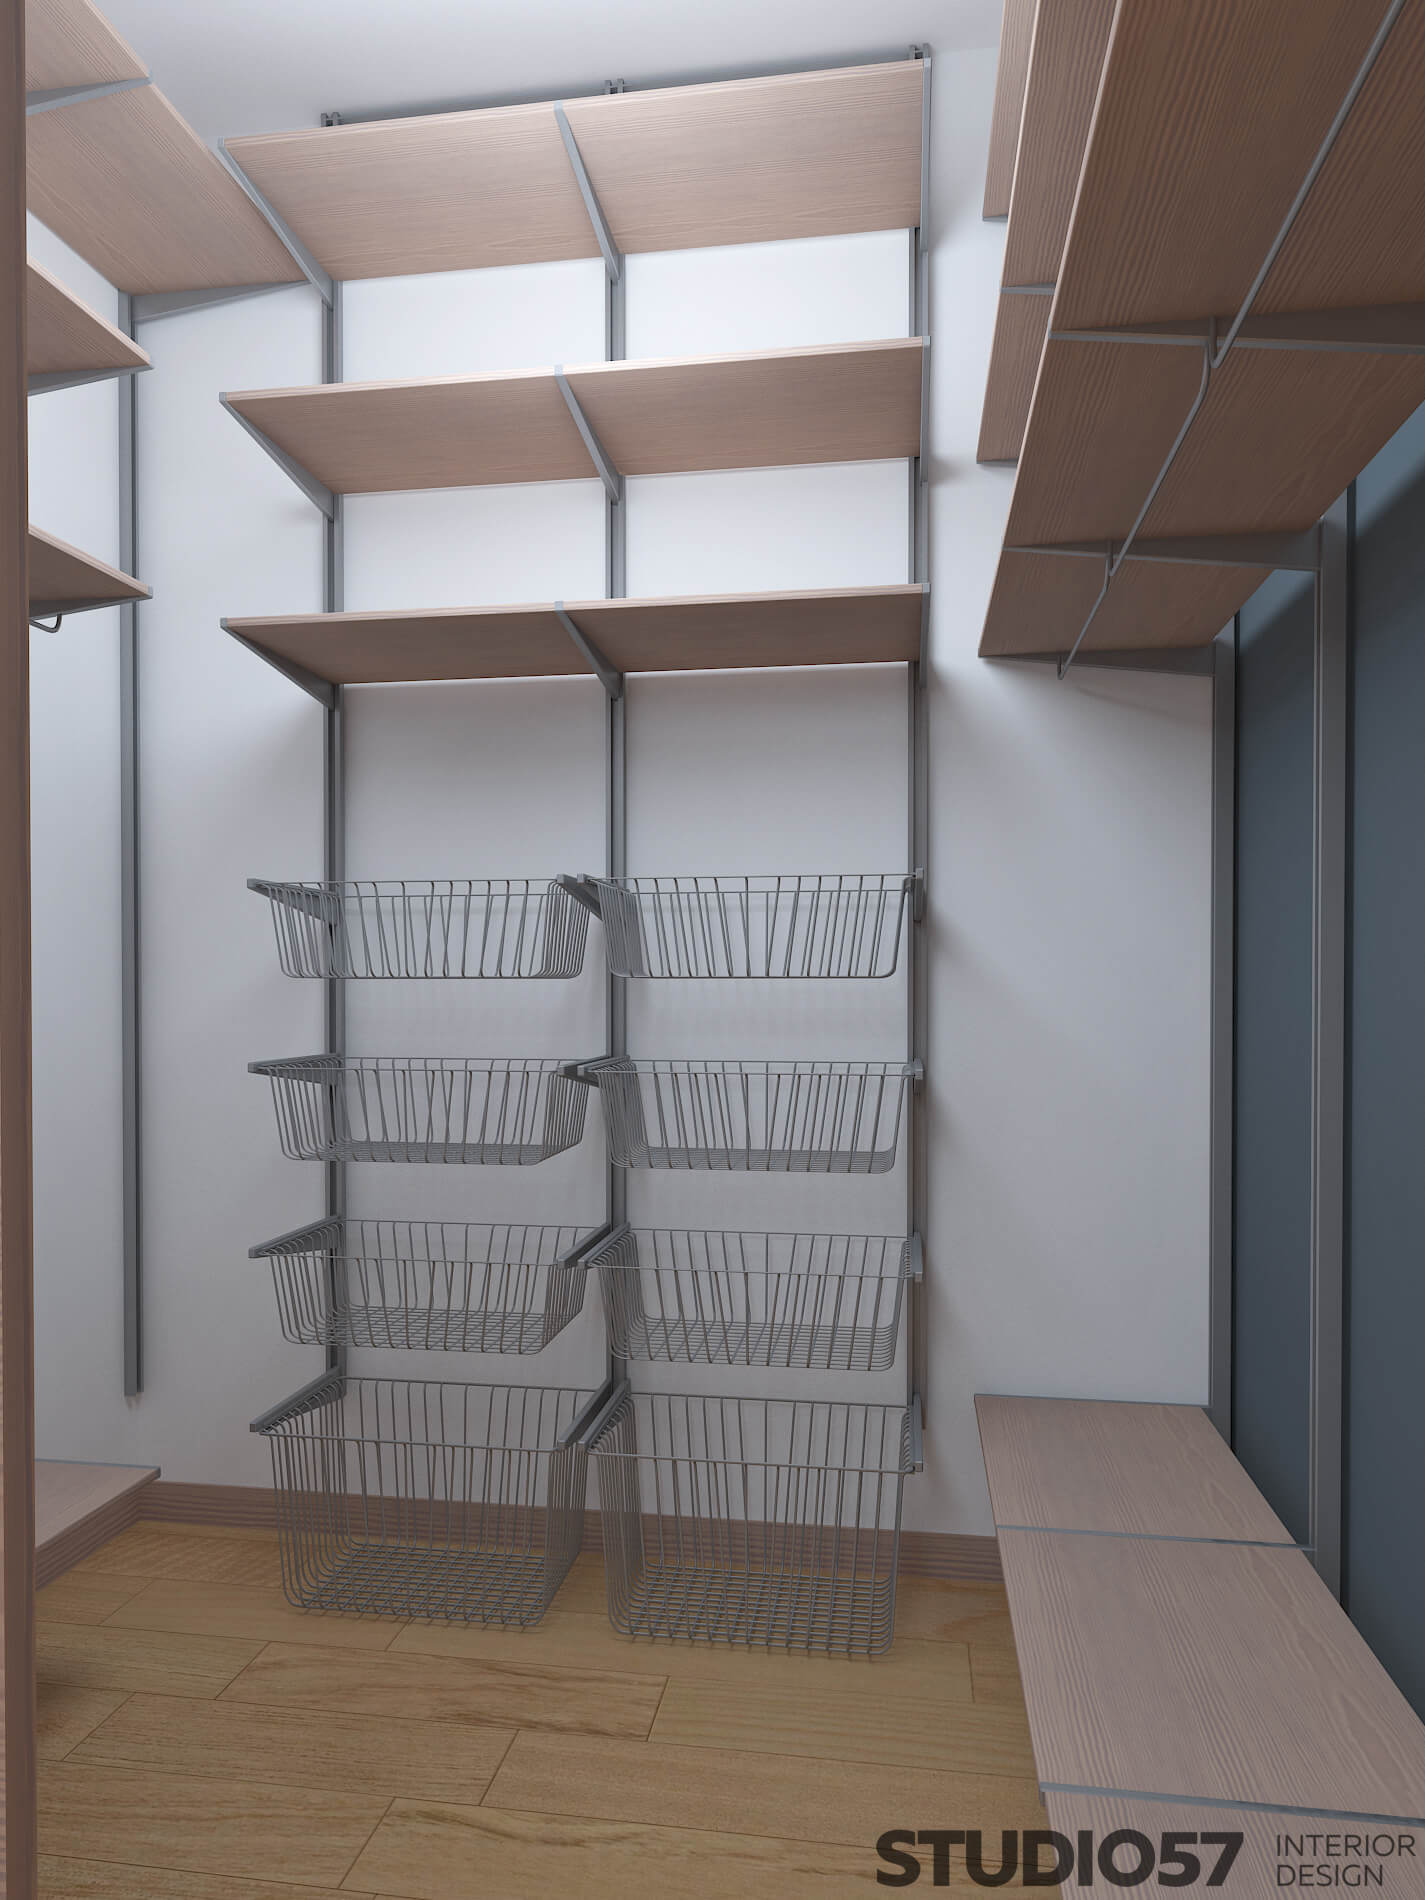 Visualization of a dressing room without cabinets